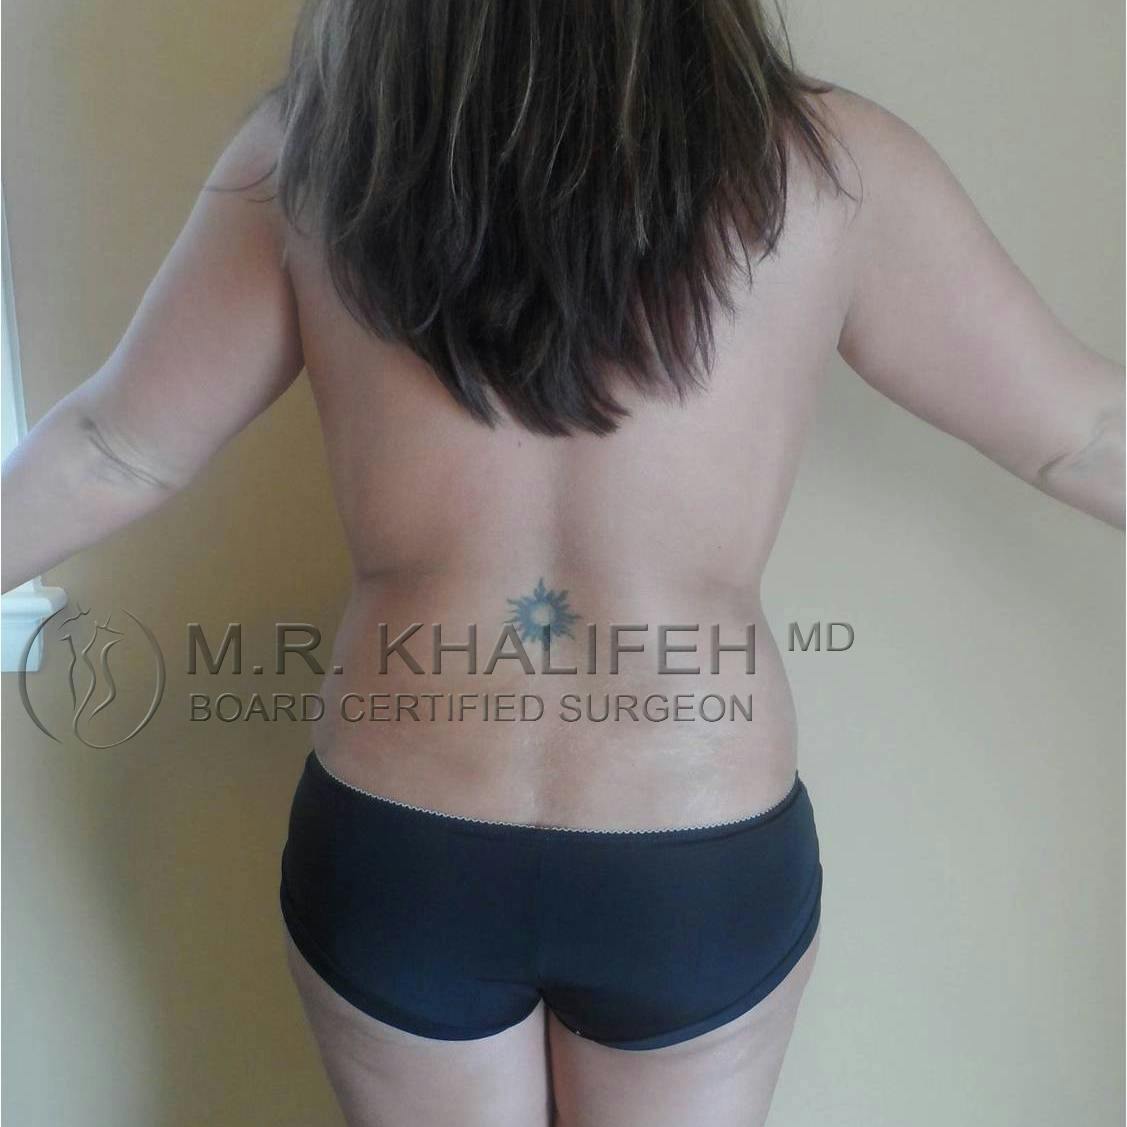 Tummy Tuck Gallery - Patient 3762172 - Image 6